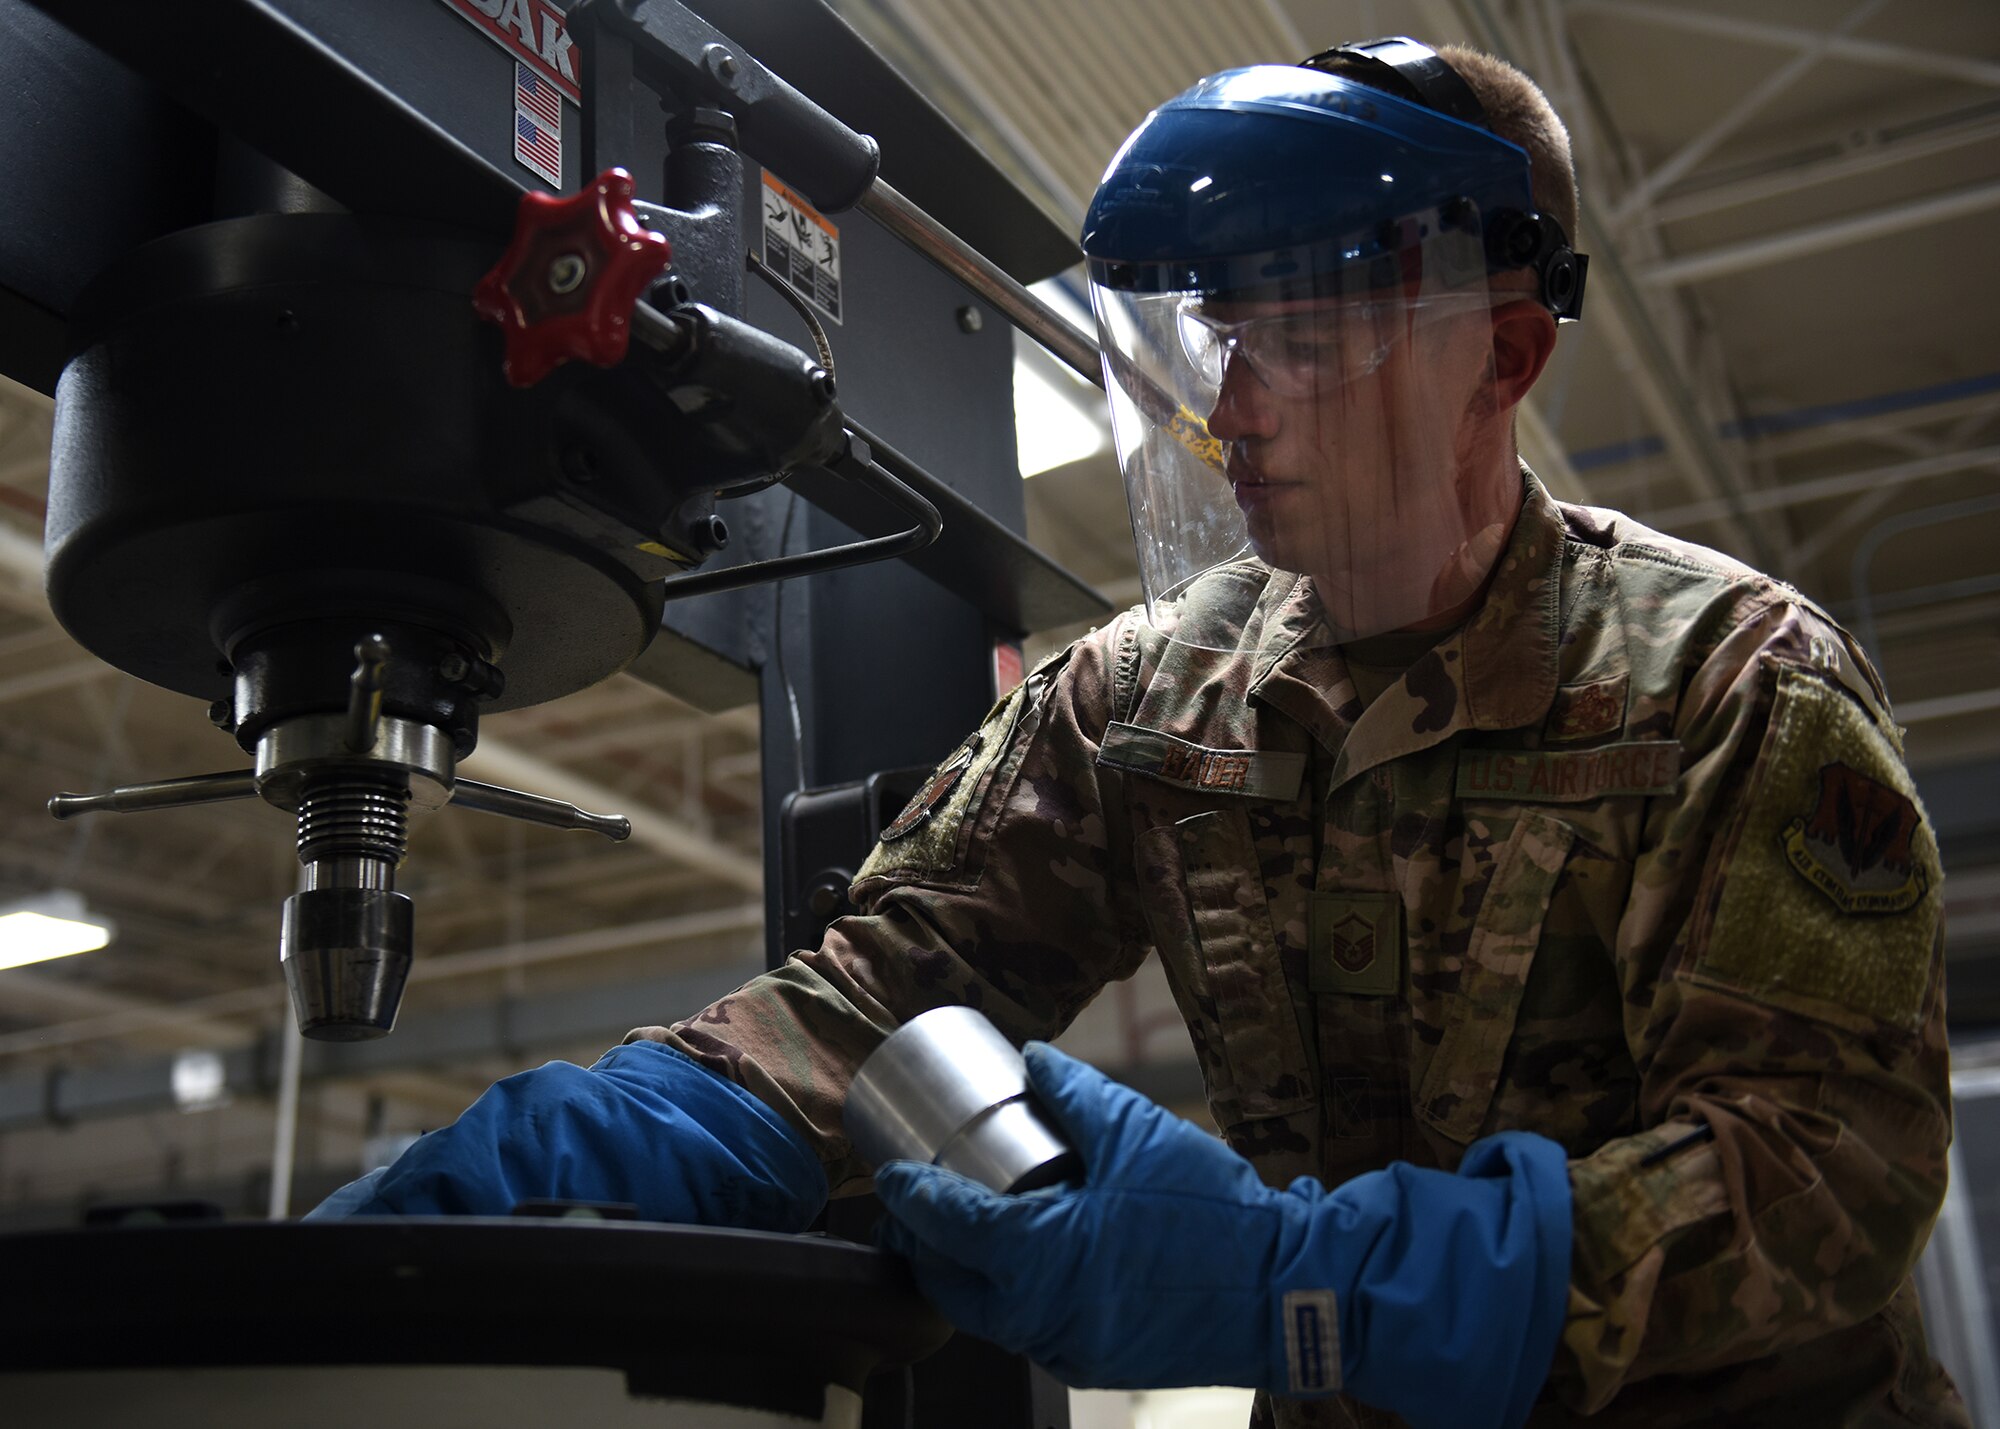 A photo of an Airman working working with tools.